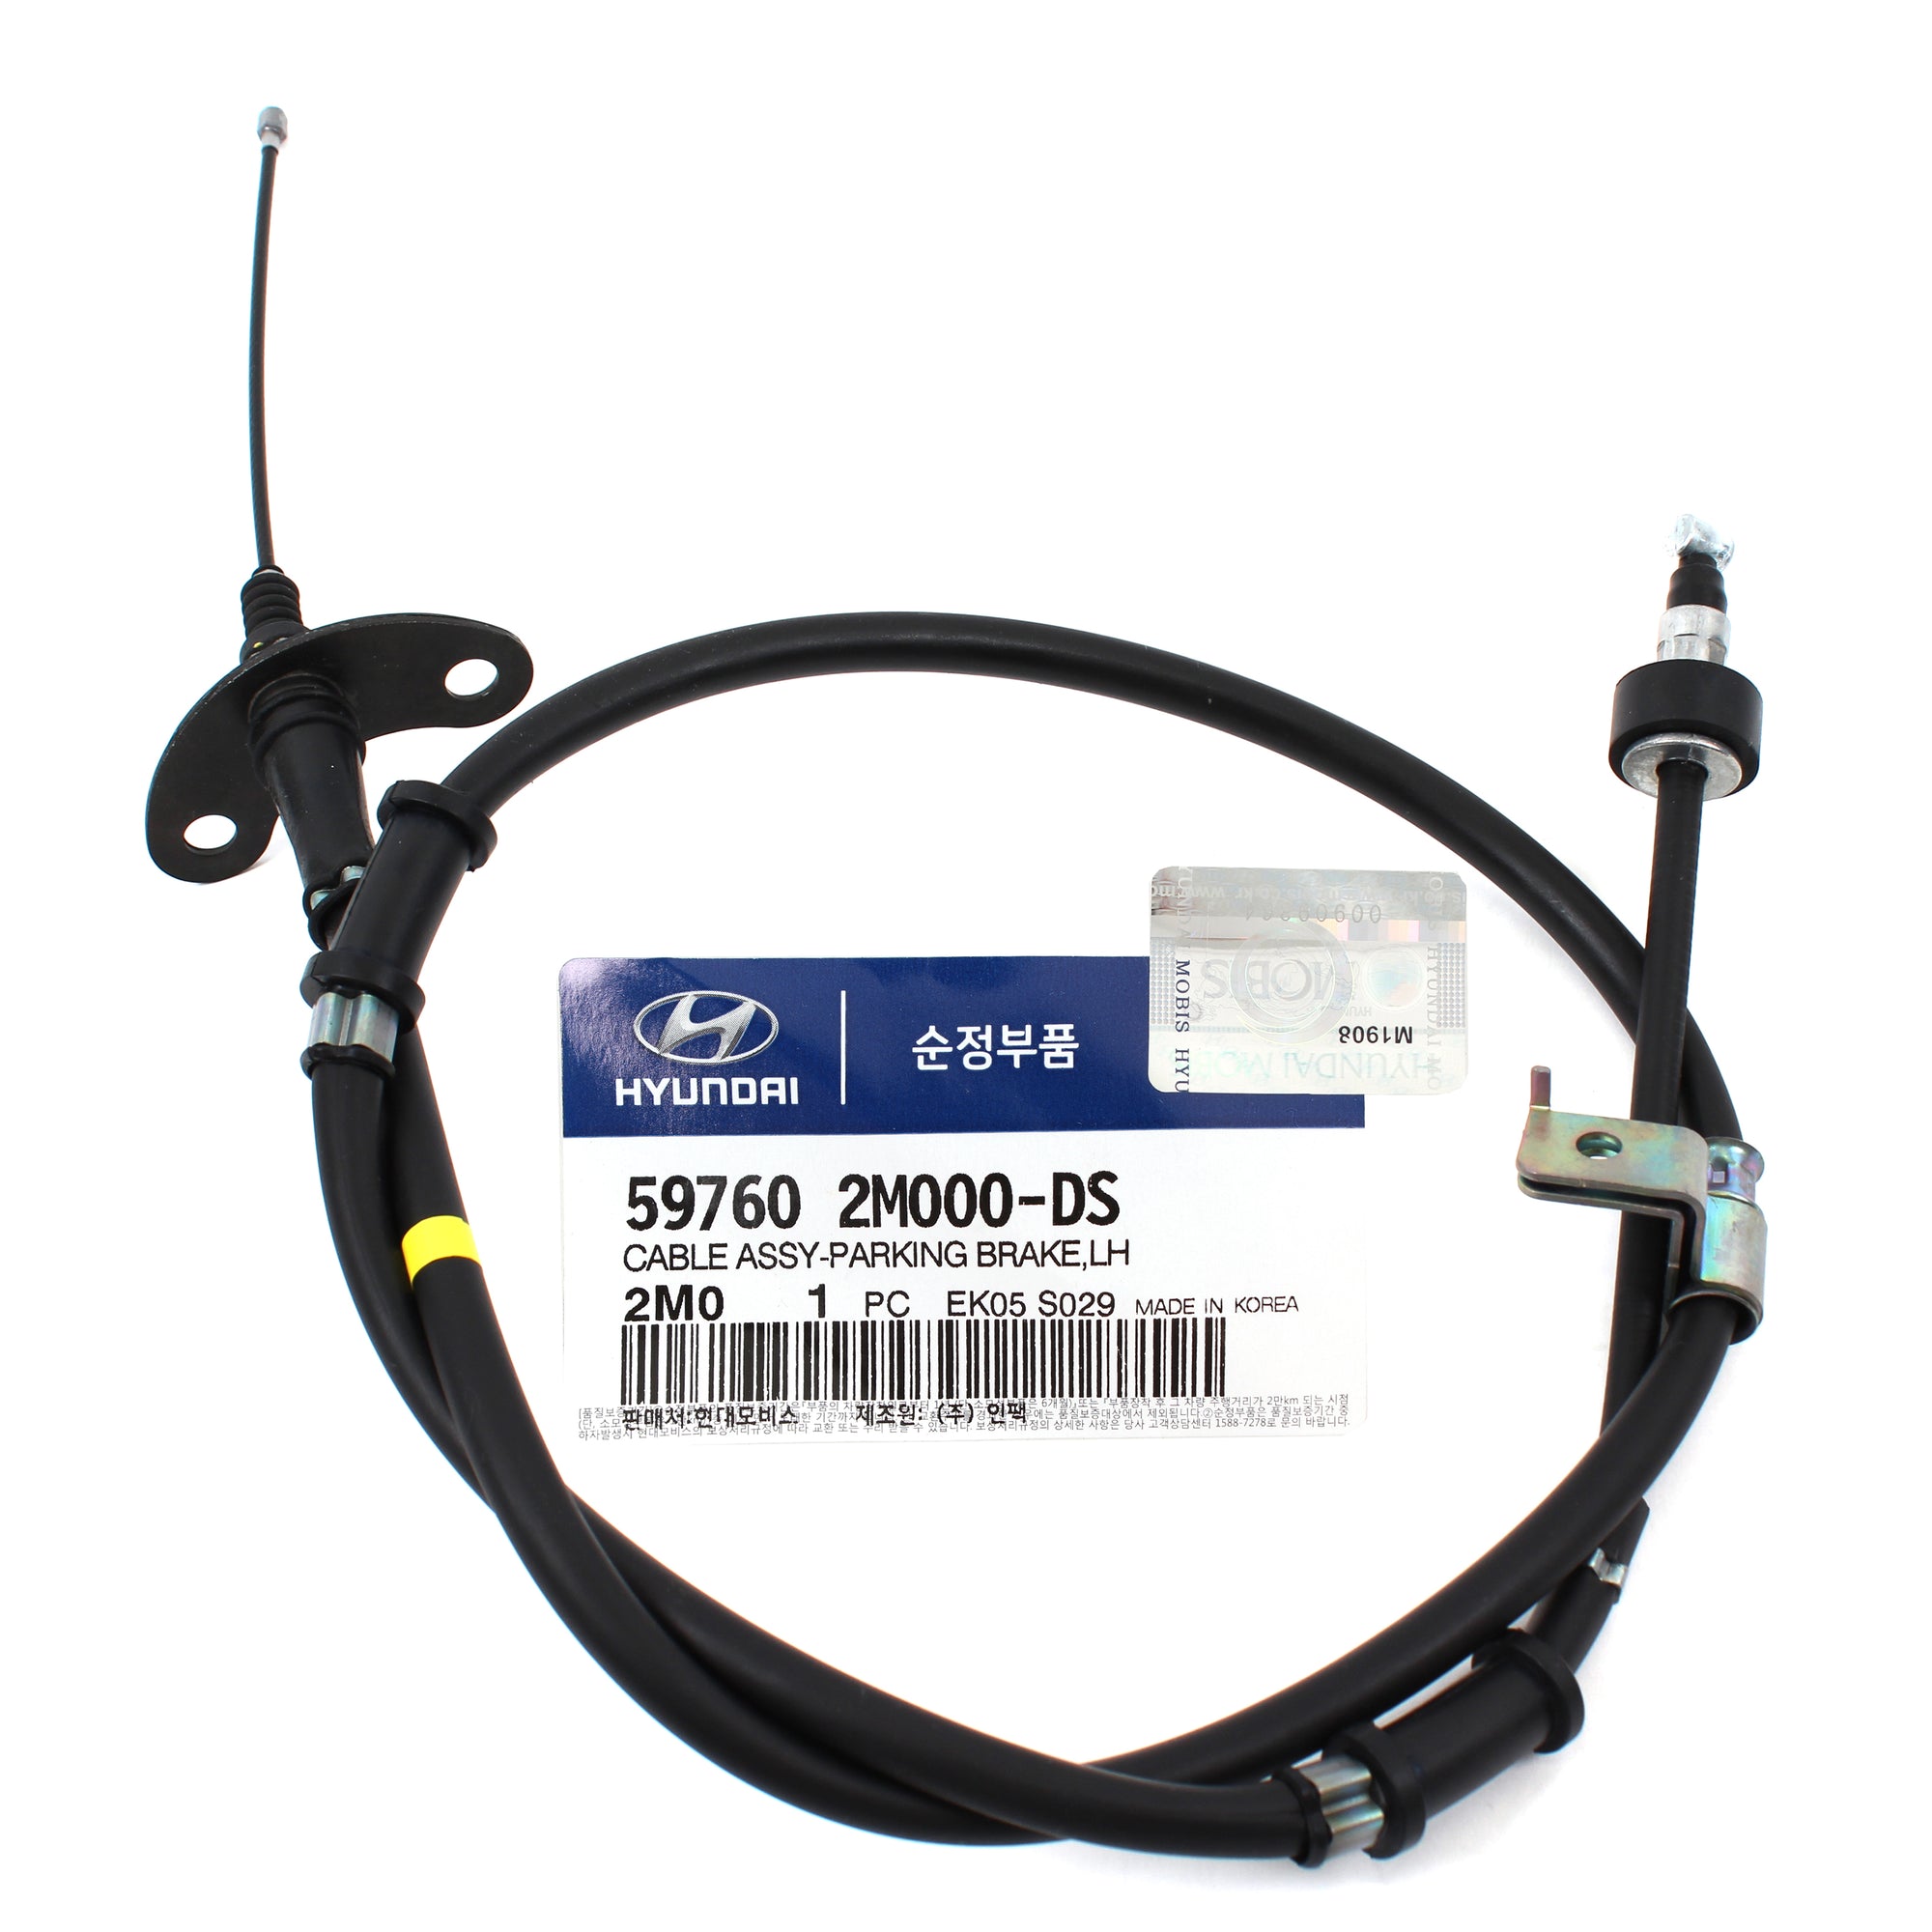 GENUINE PARKING BRAKE CABLE DRIVER LH for 10-16 HYUNDAI GENESIS COUPE 597602M000